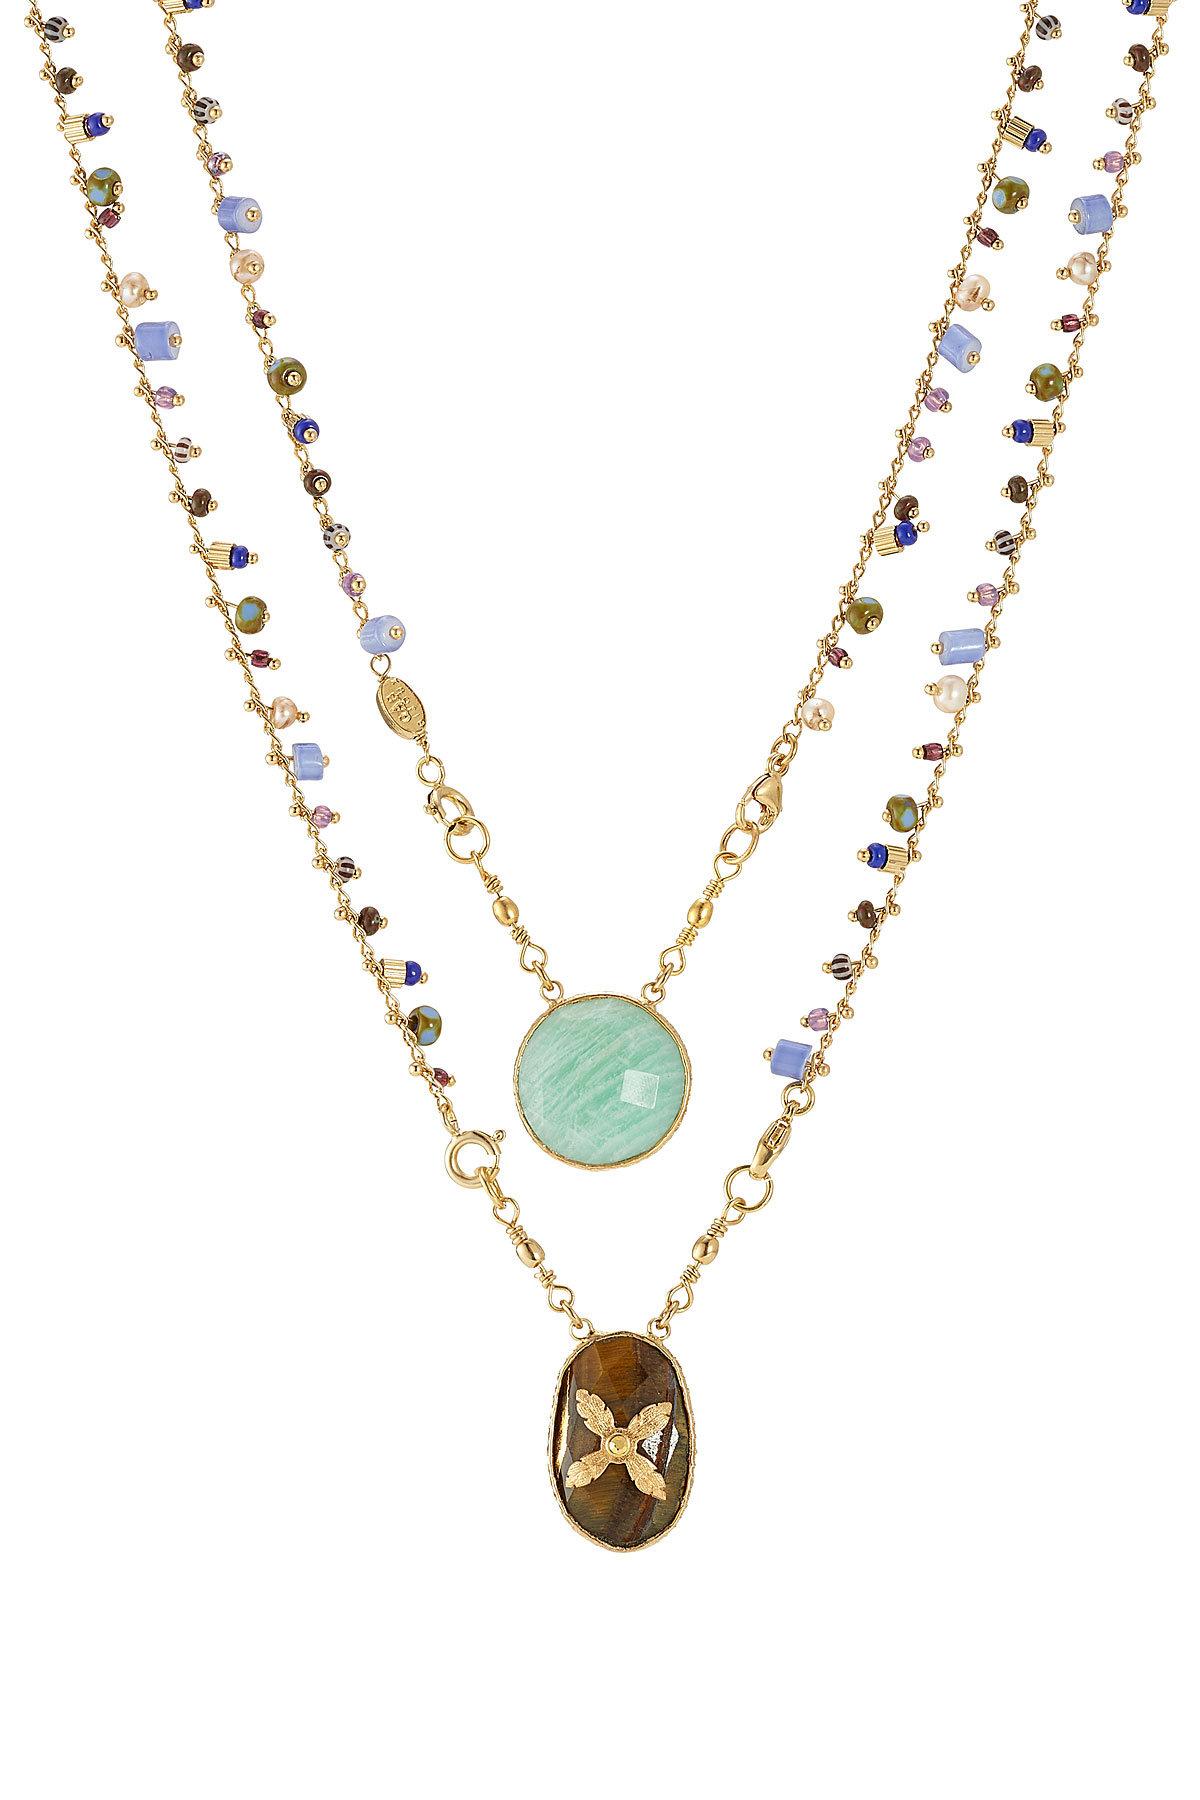 Lyst - Gas Bijoux Scapulaire Serti 24kt Gold Plated Necklace With ...